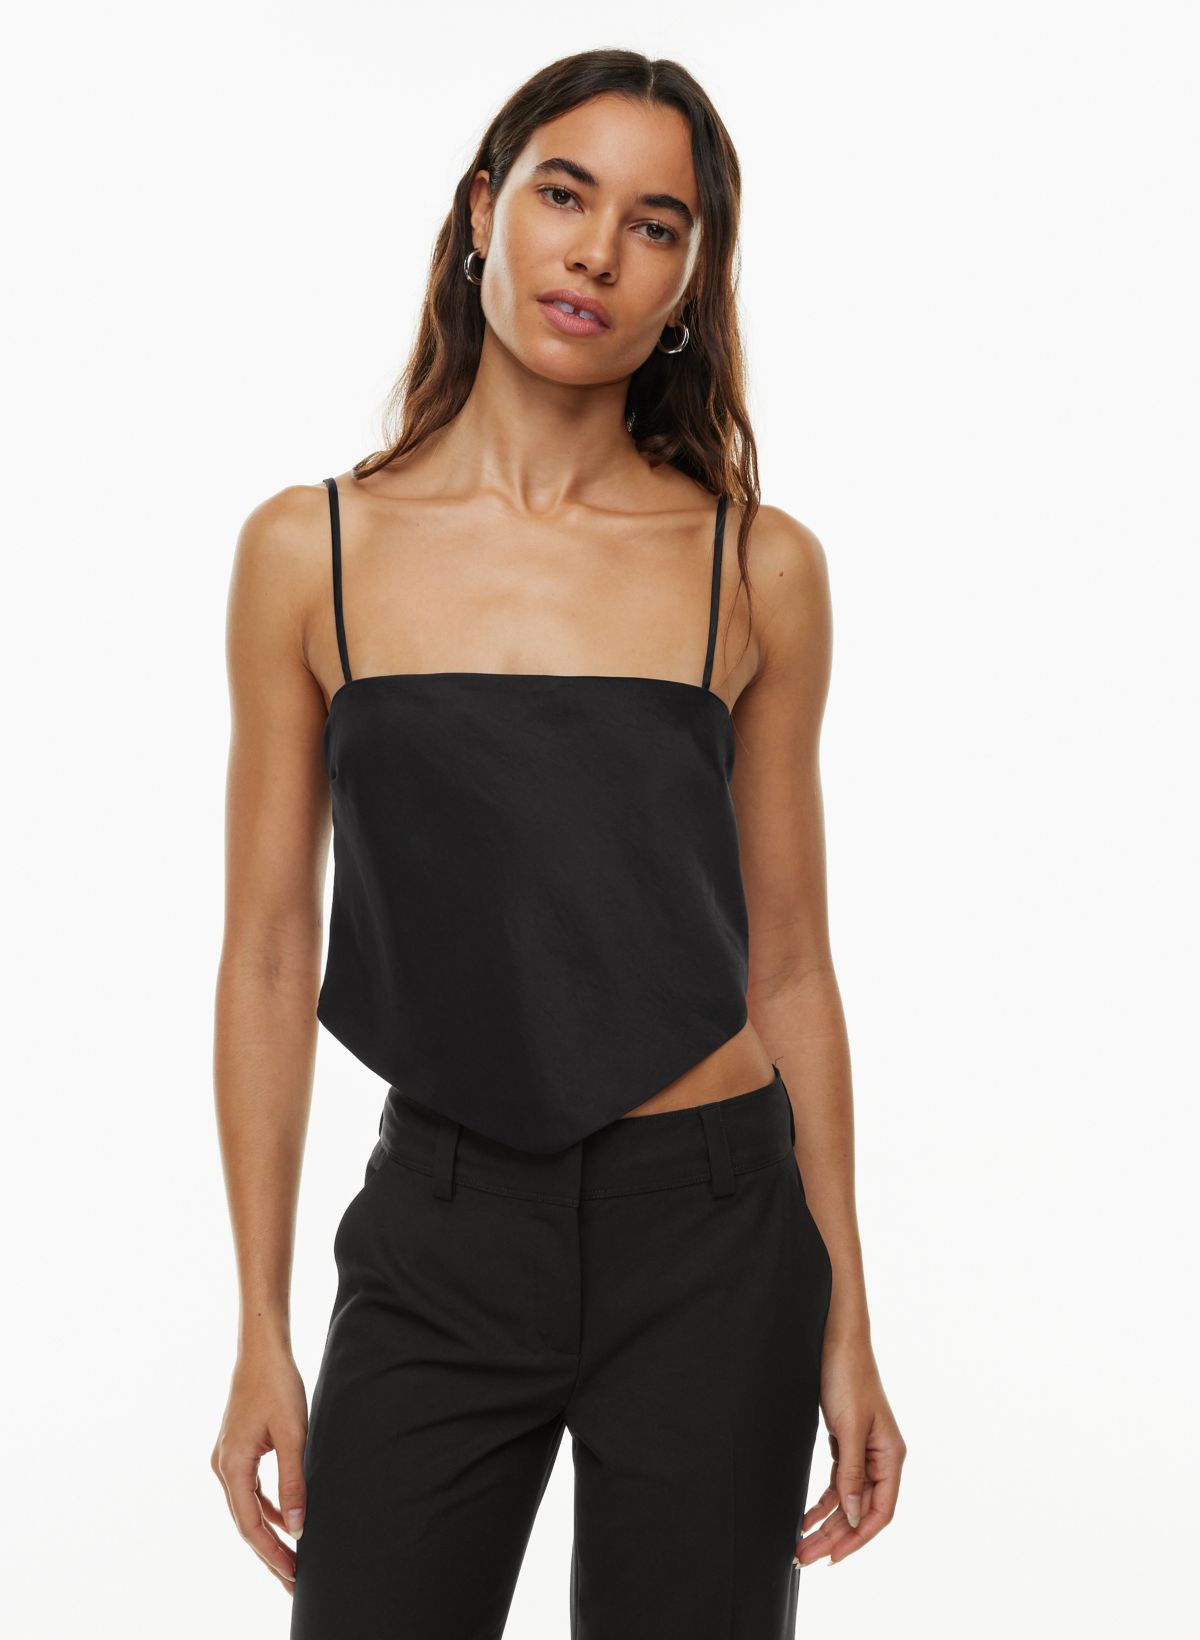 Spaghetti Strap Tank Top in 100% Ribbed Cotton and Satin 